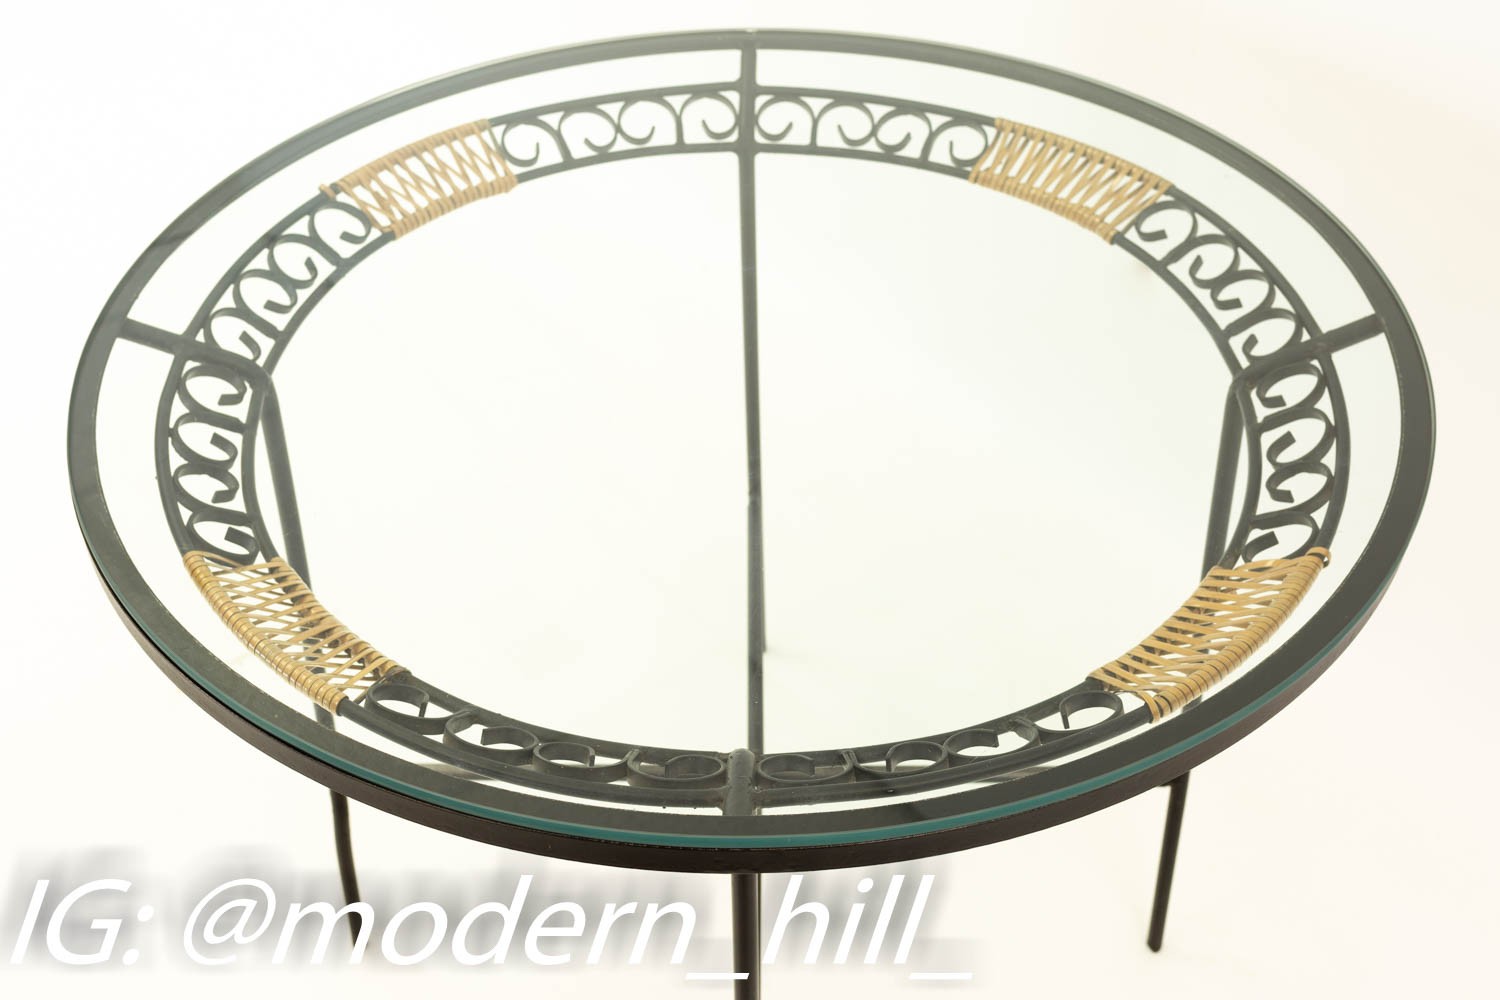 Arthur Umanoff for Shaver Howard Glass & Metal Mid Century Indoor Outdoor Round Dining Table